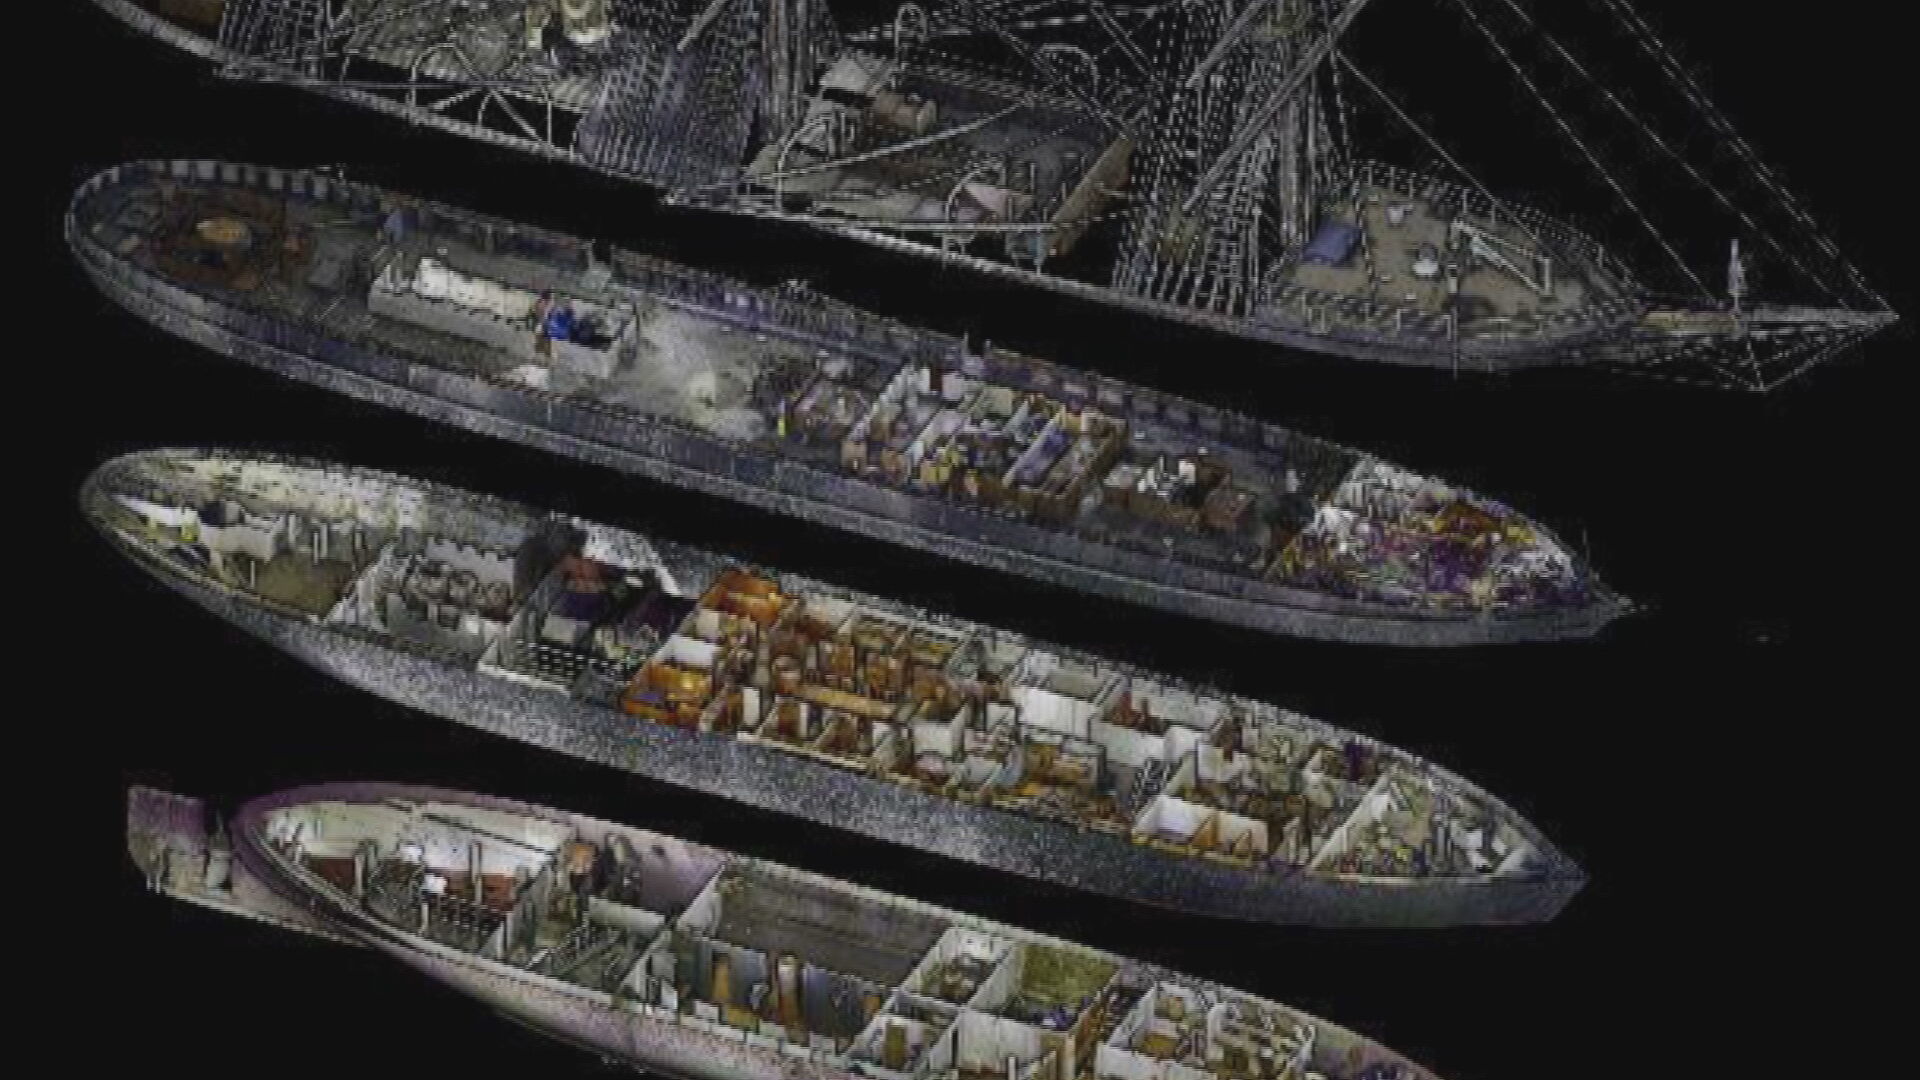 Exploded view of the RRS Discovery, showing the interior layout of each deck of the ship.